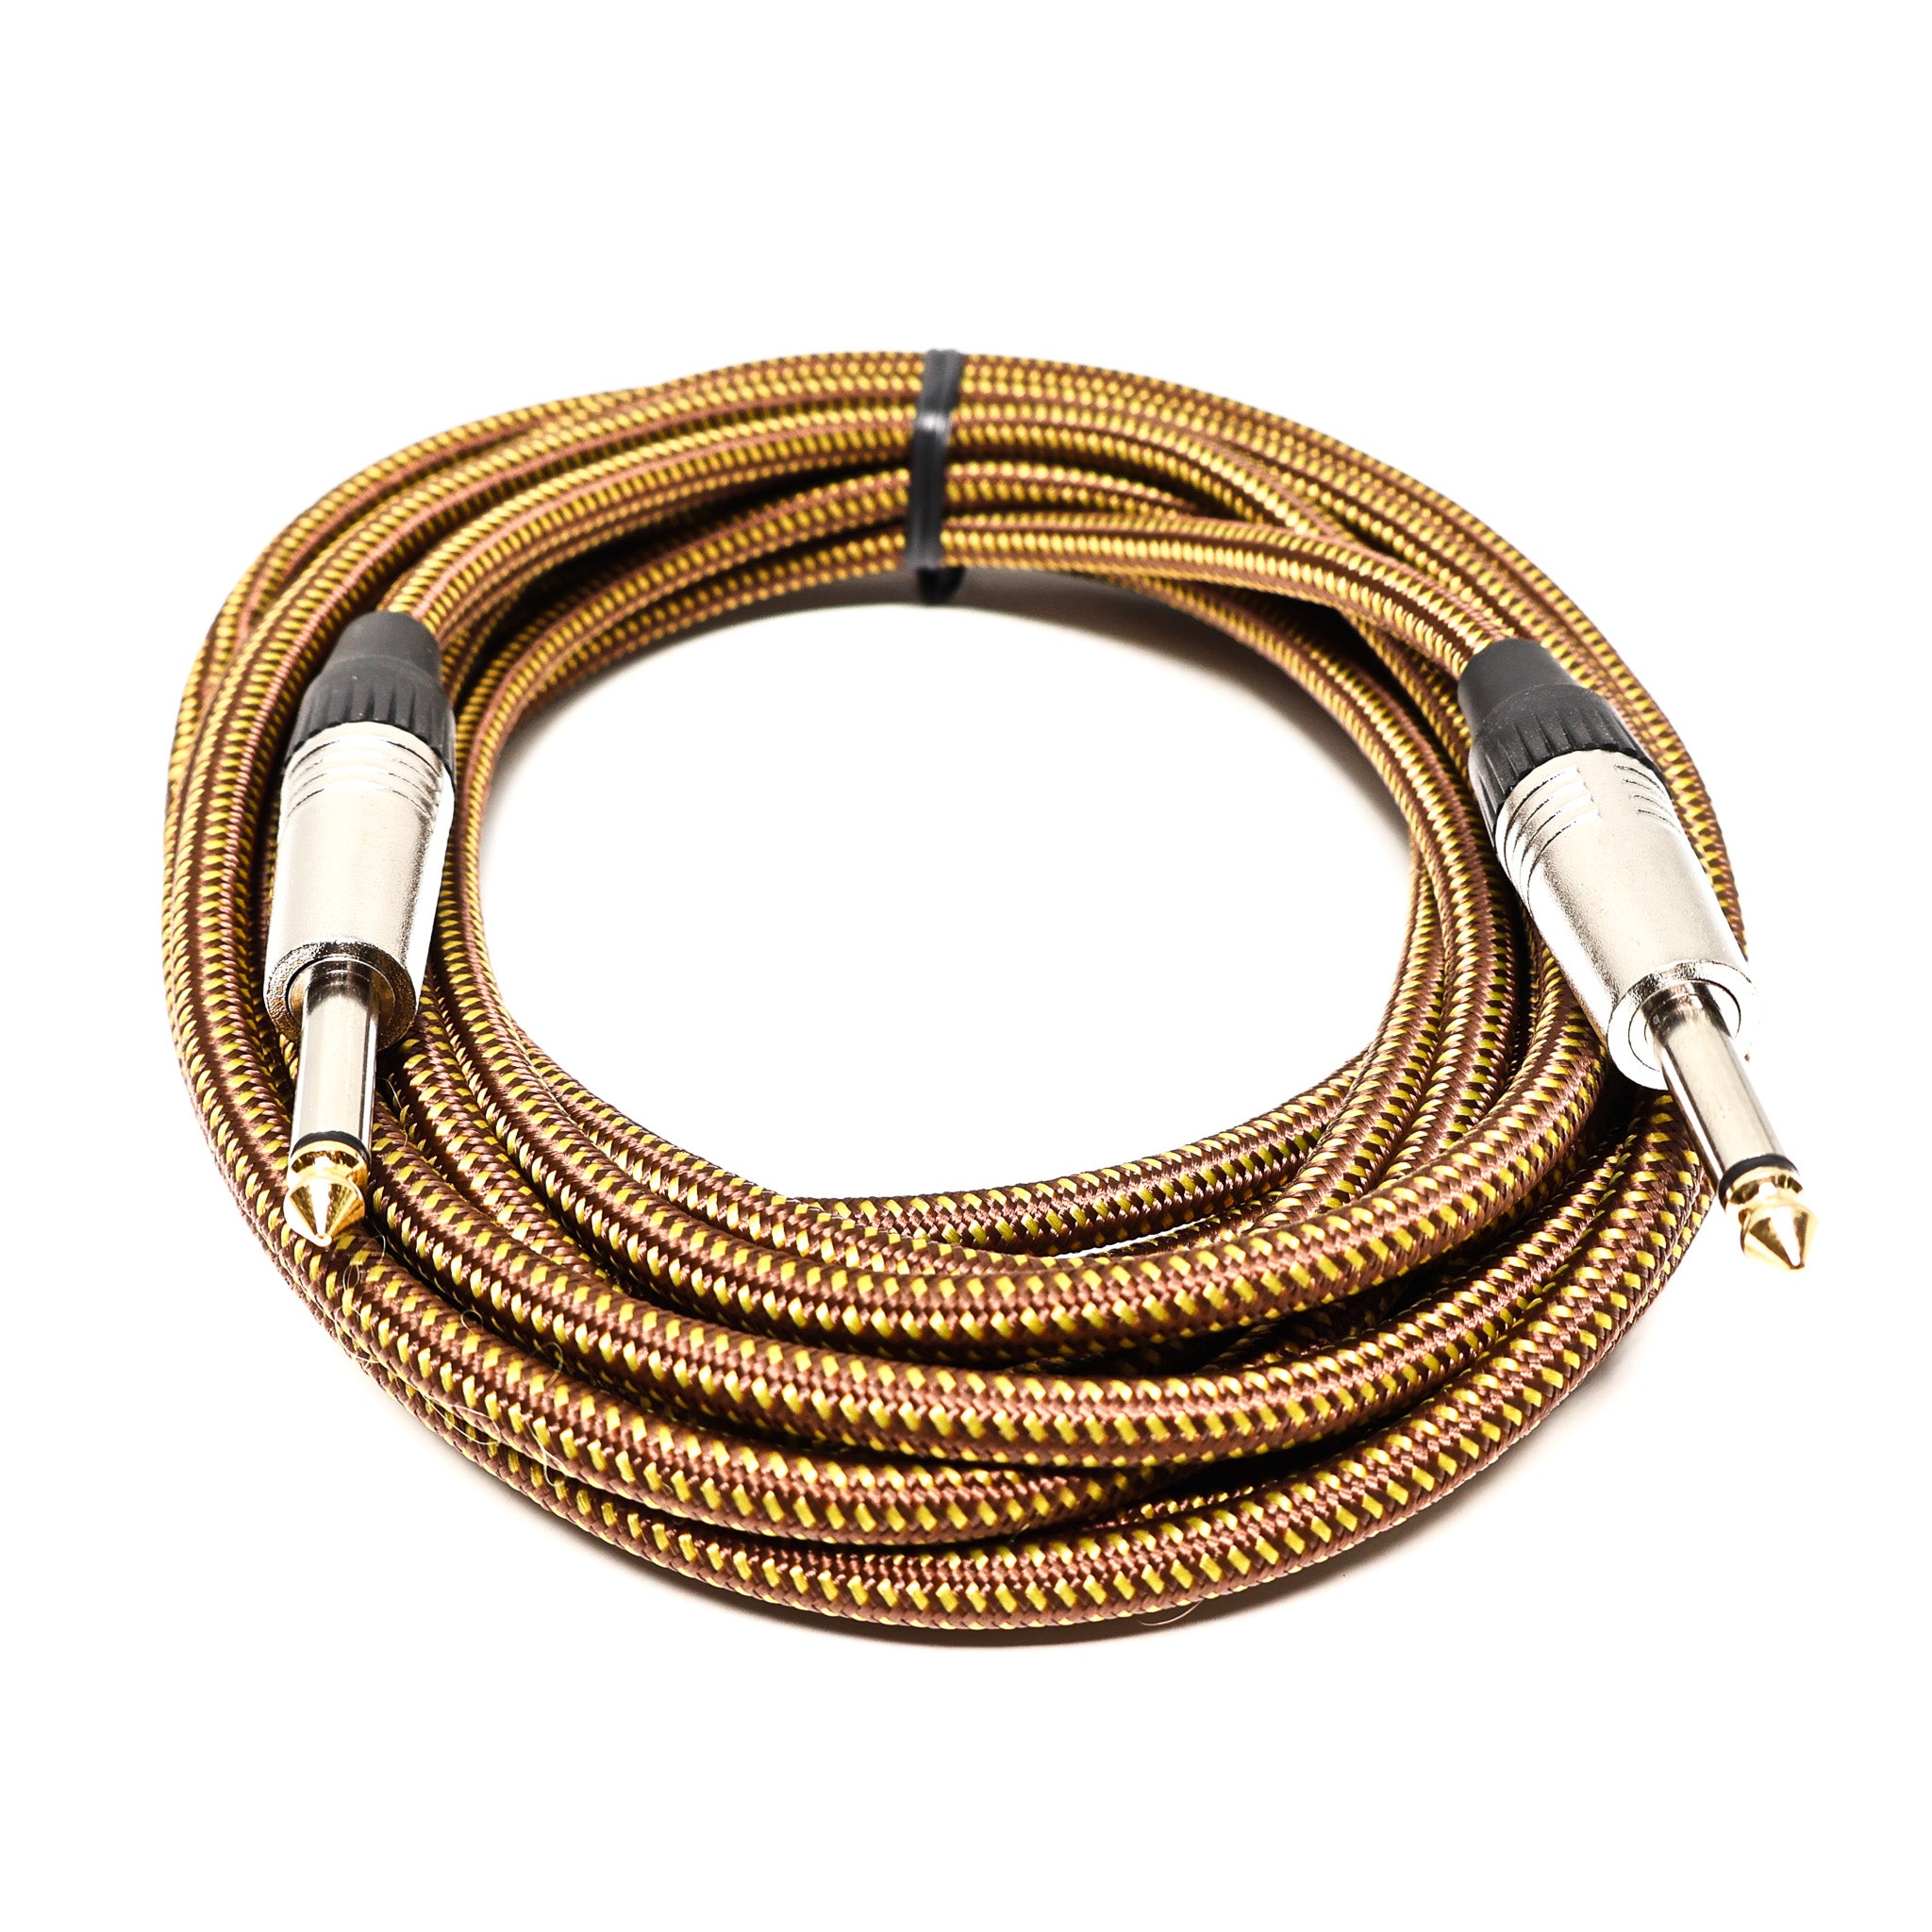 Professional Tweed Instrument Cable - 20 Feet